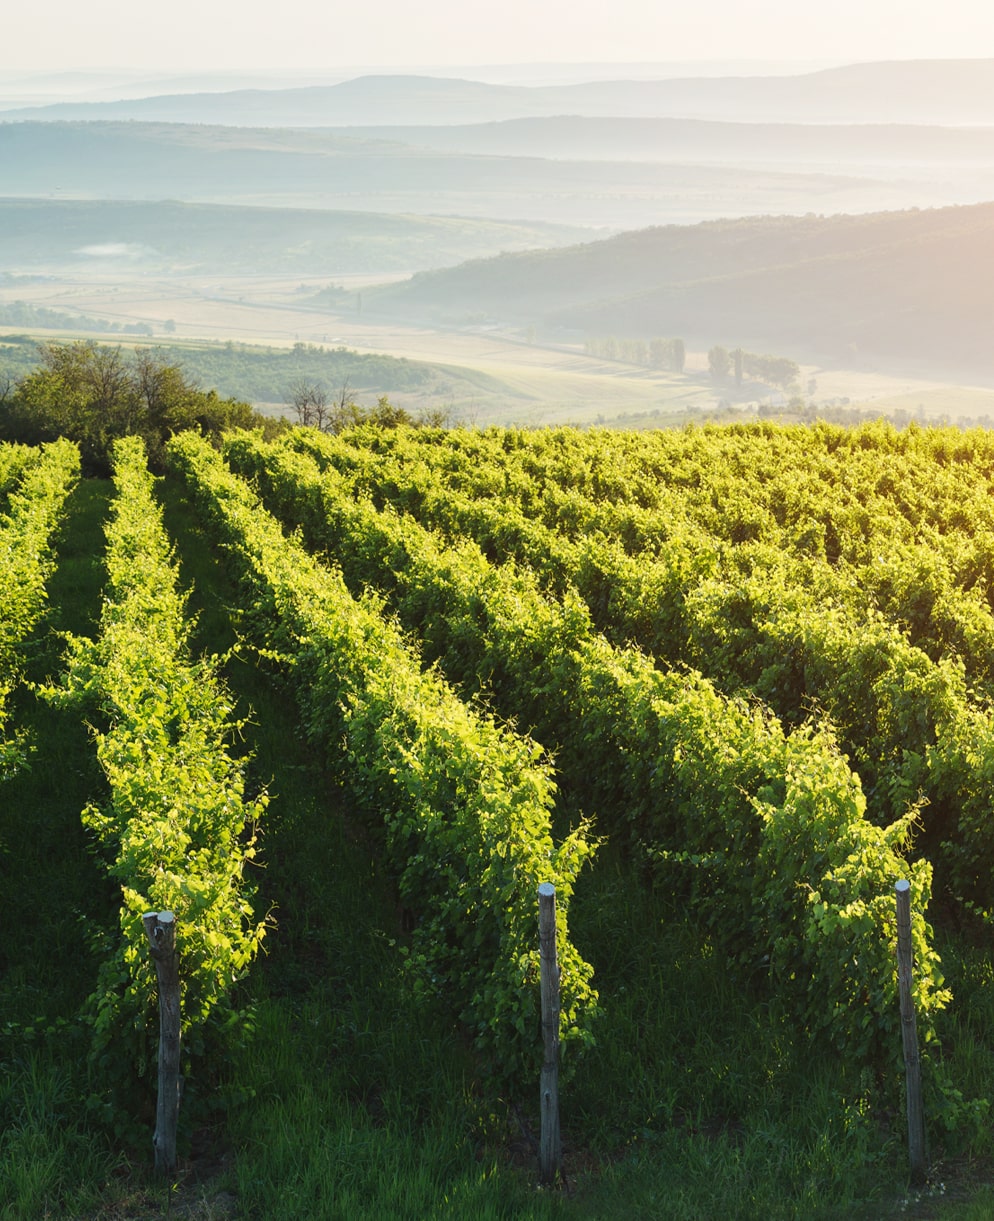 The Corcova Roy & Dâmboviceanu vineyard currently spans 70 hectares, featuring replanted traditional local grape varieties from the time of the Bibești estate